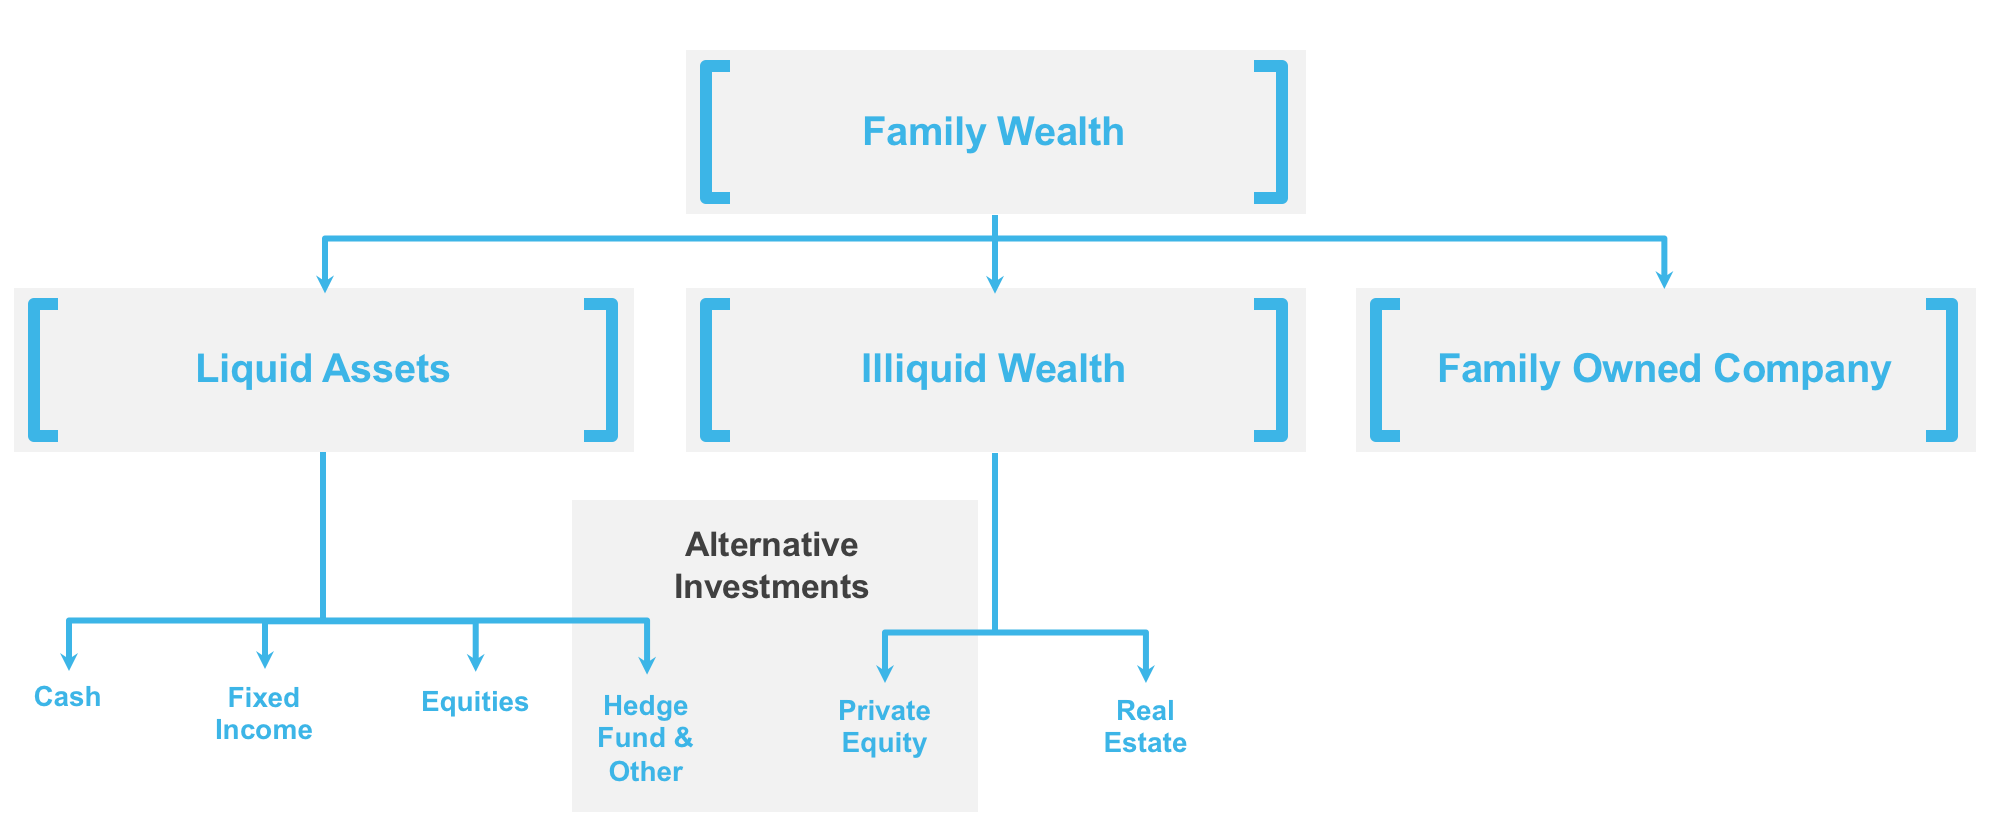 Family Wealth flow chart